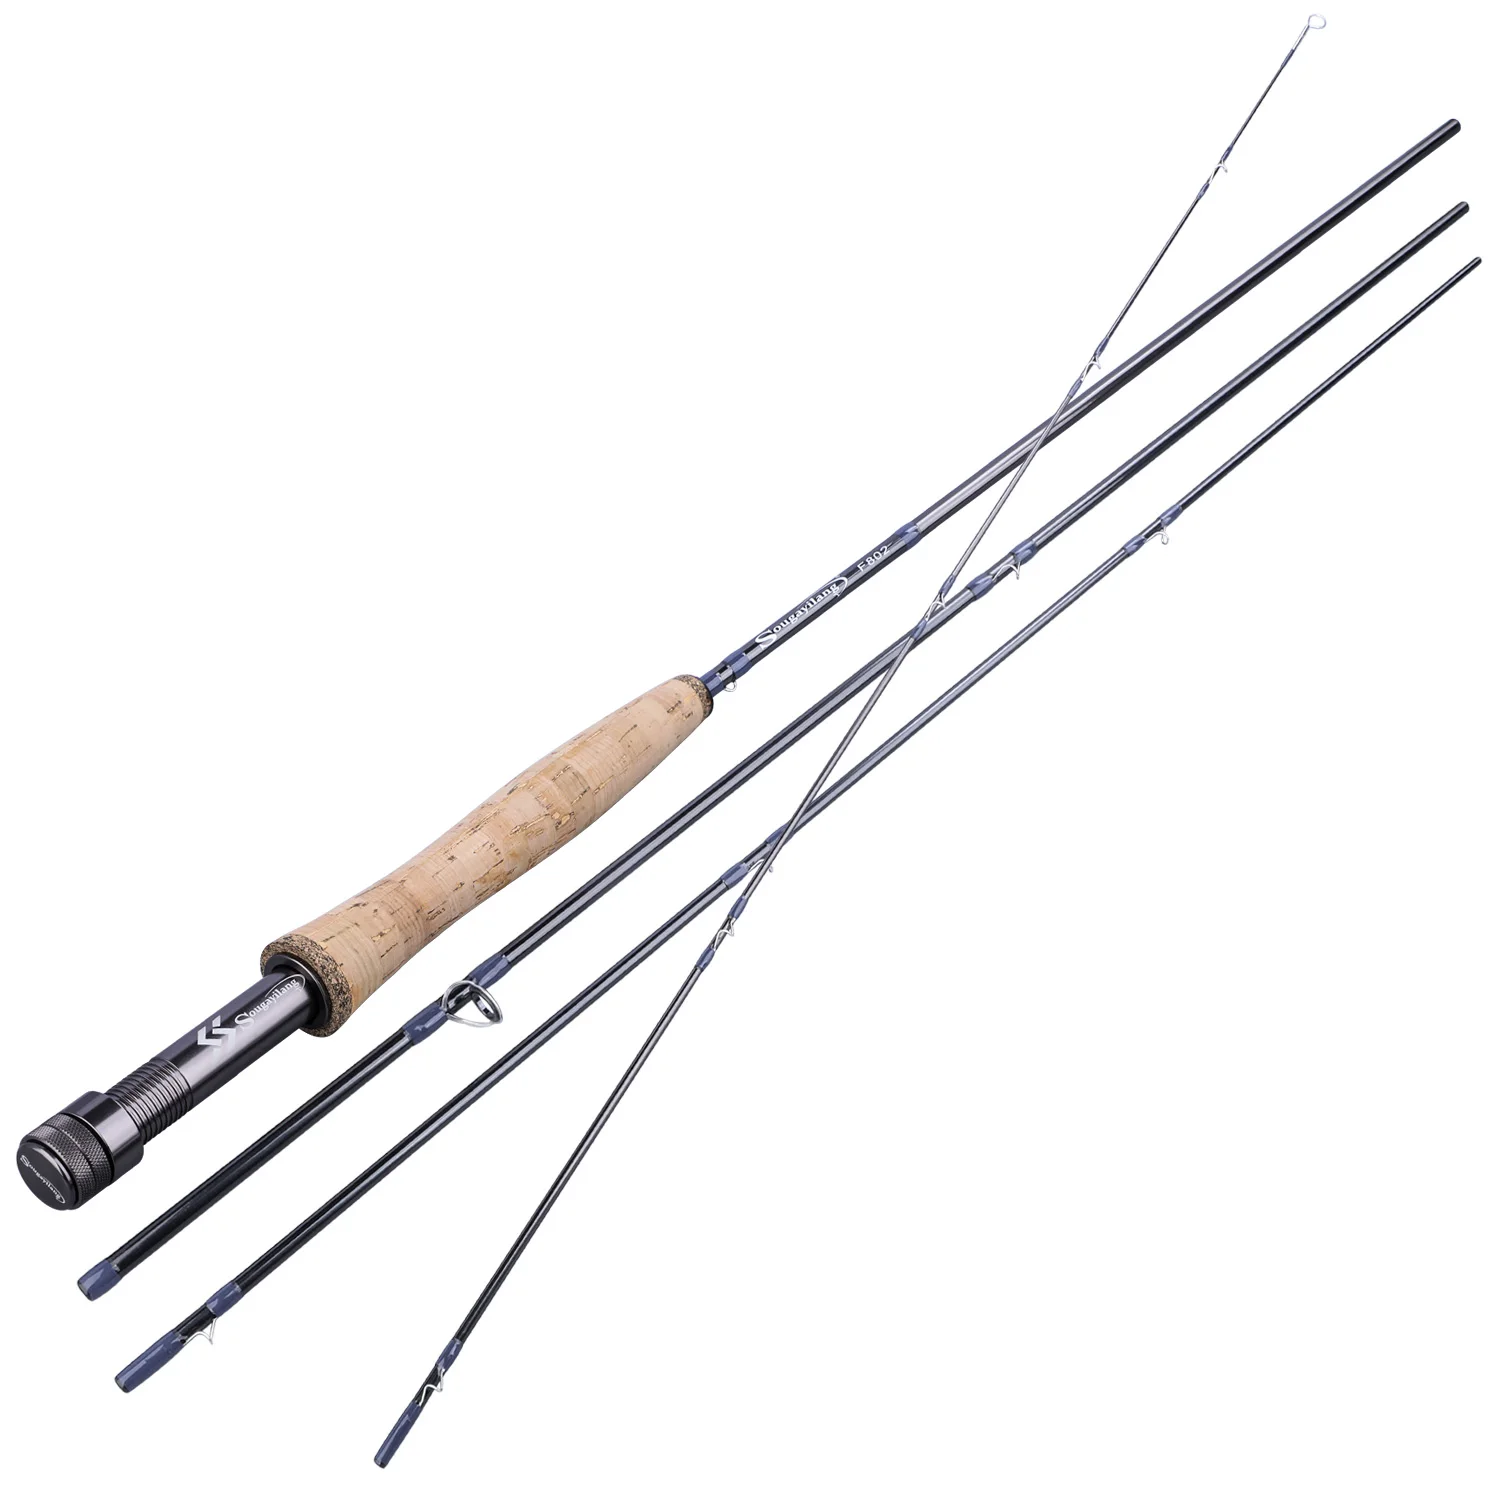 Fly Fishing Rods 4, Trout Fishing Rod, Fly Rod Salmon